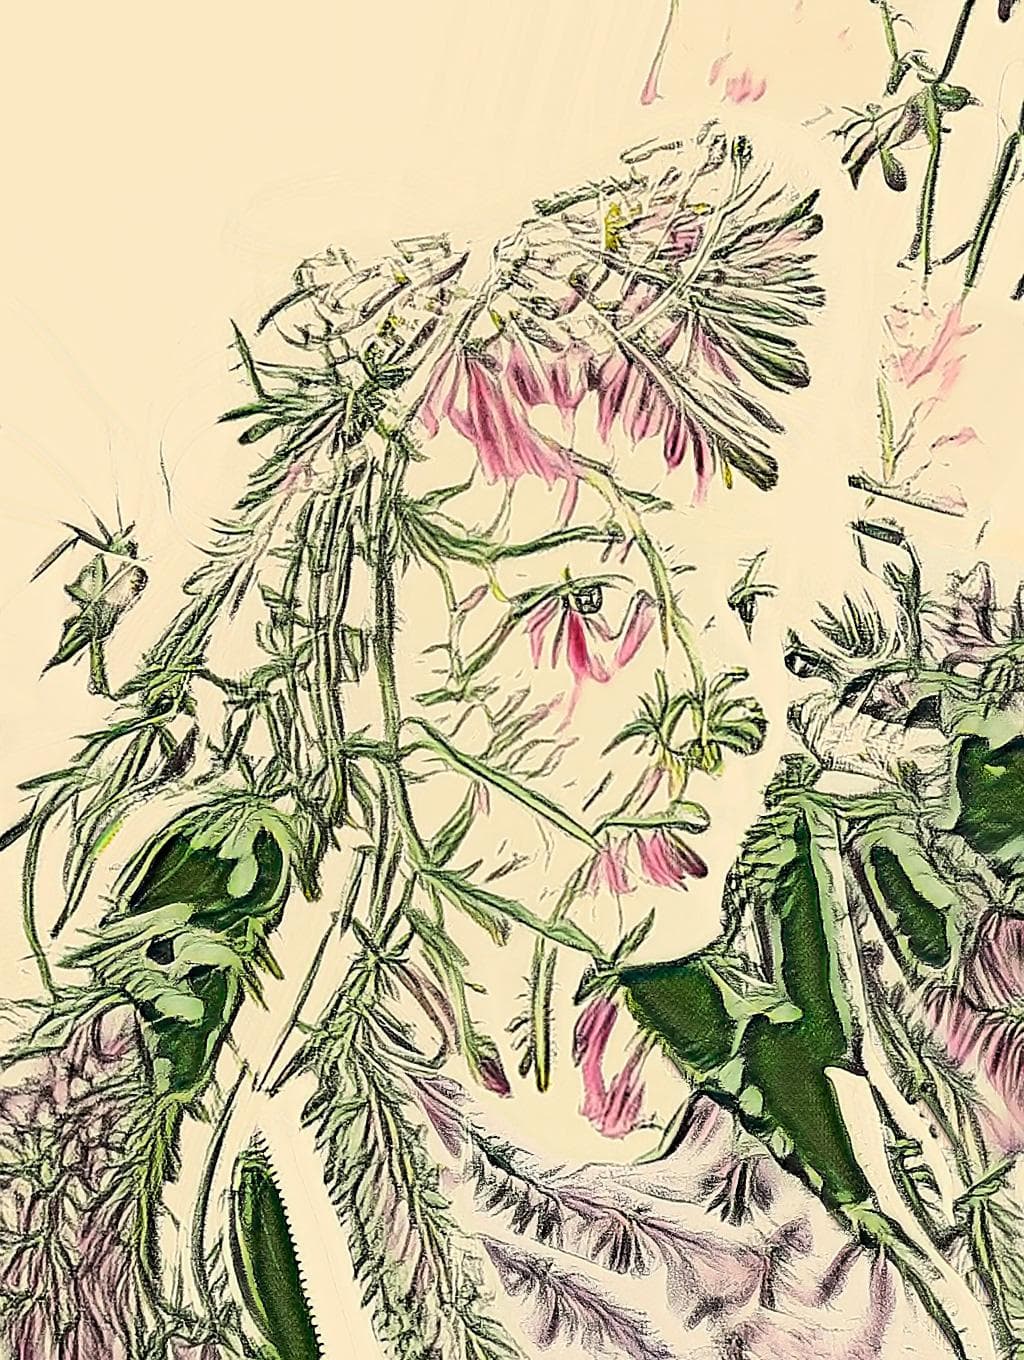 Person’s face replaced with pink and green floral pattern